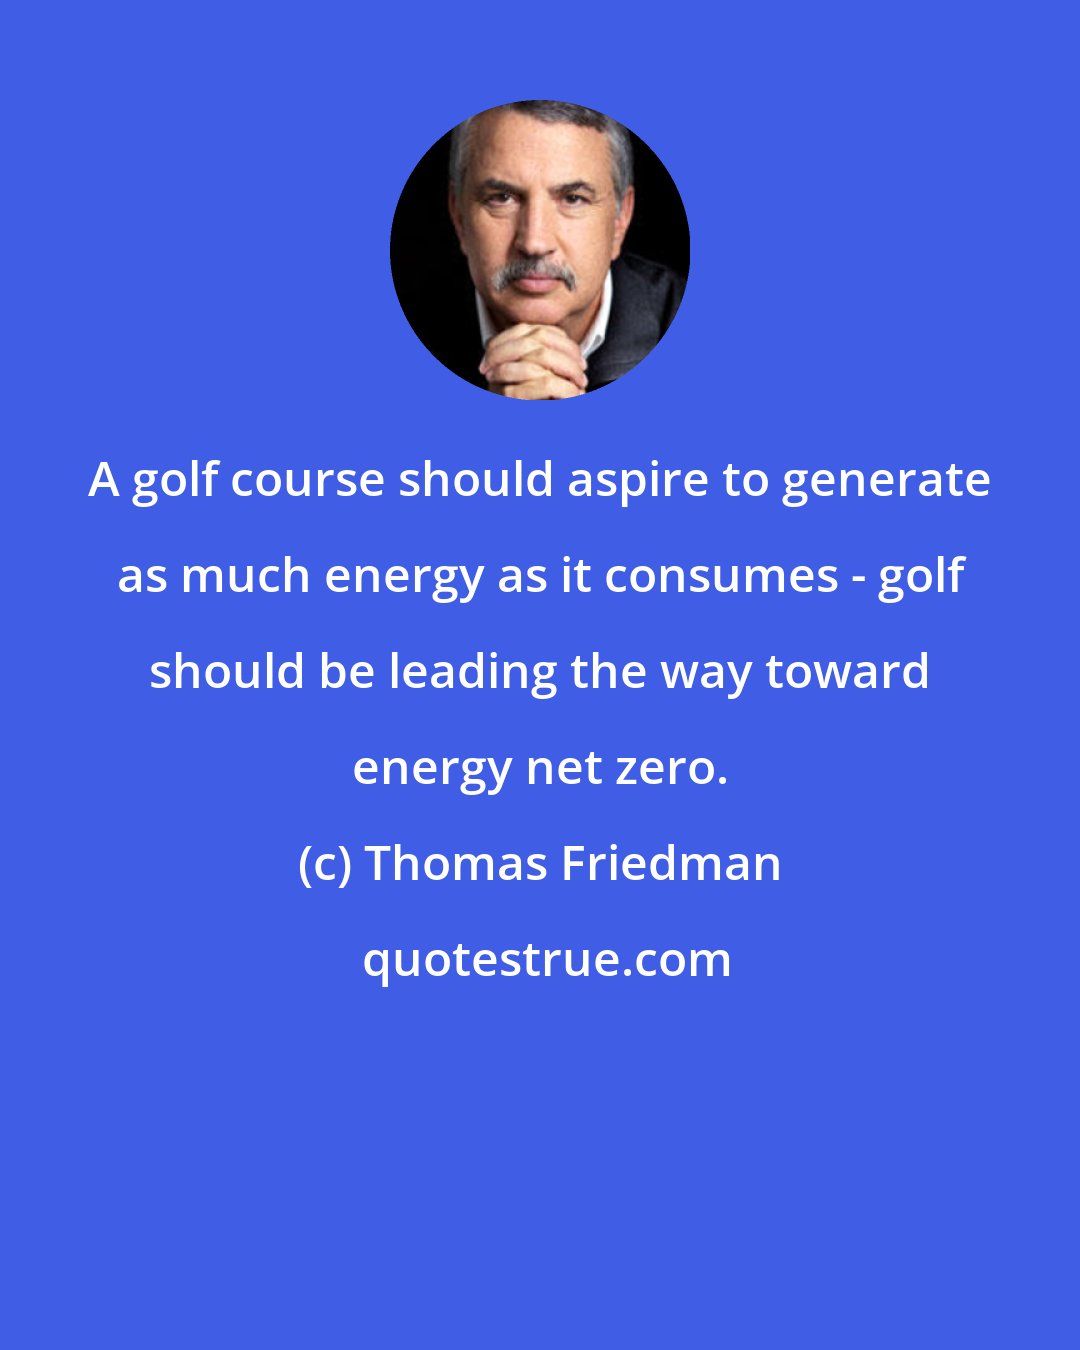 Thomas Friedman: A golf course should aspire to generate as much energy as it consumes - golf should be leading the way toward energy net zero.